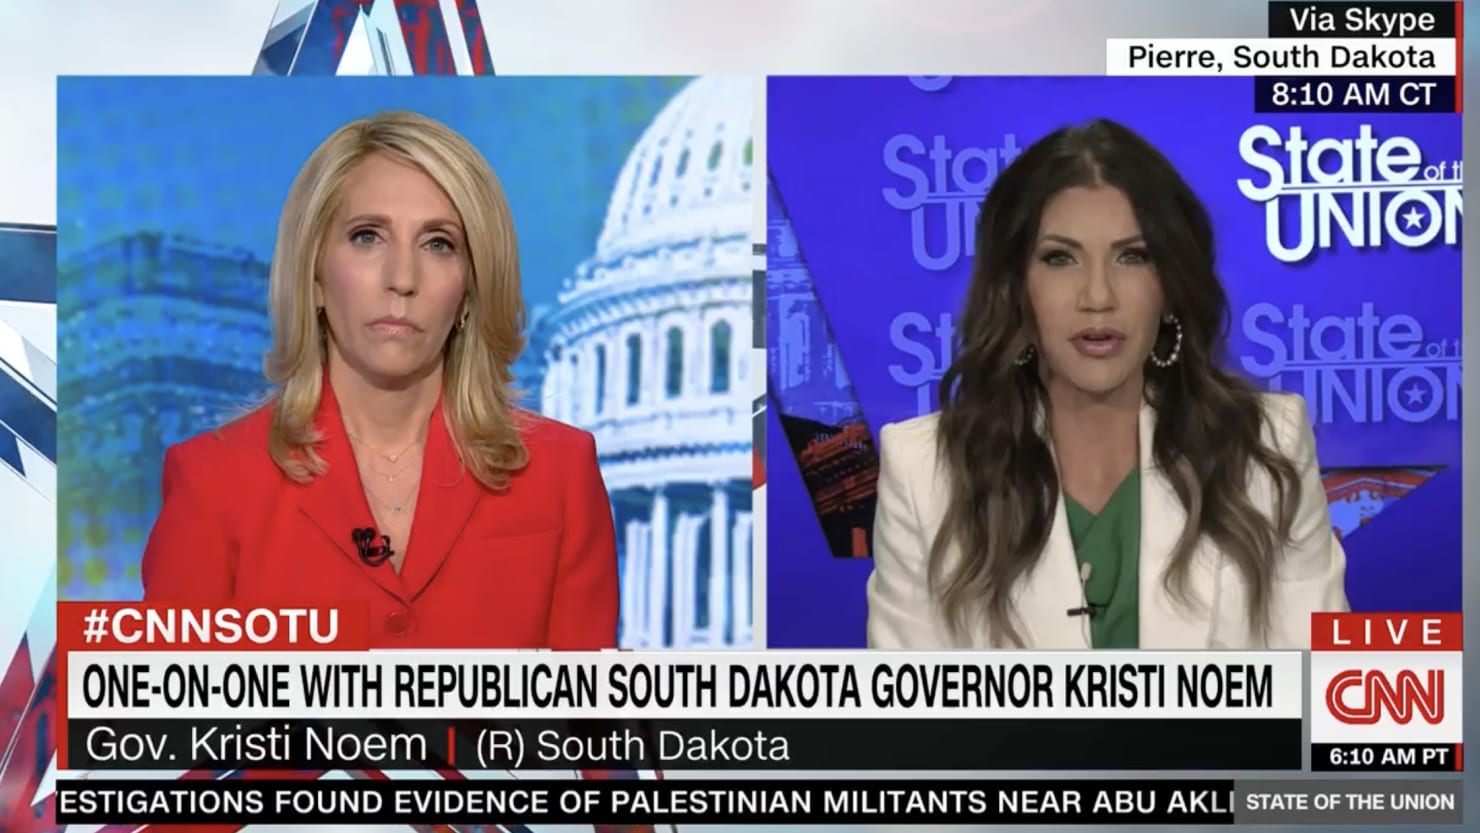 Kristi Noem Gets Grilled on Whether South Dakota Would Force 10-Year-Old to Have Baby - The Daily Beast : “I don’t believe a tragic situation should be perpetuated by another tragedy,” Noem said as she dodged questions by CNN’s Dana Bash Sunday morning.  | Tranquility 國際社群